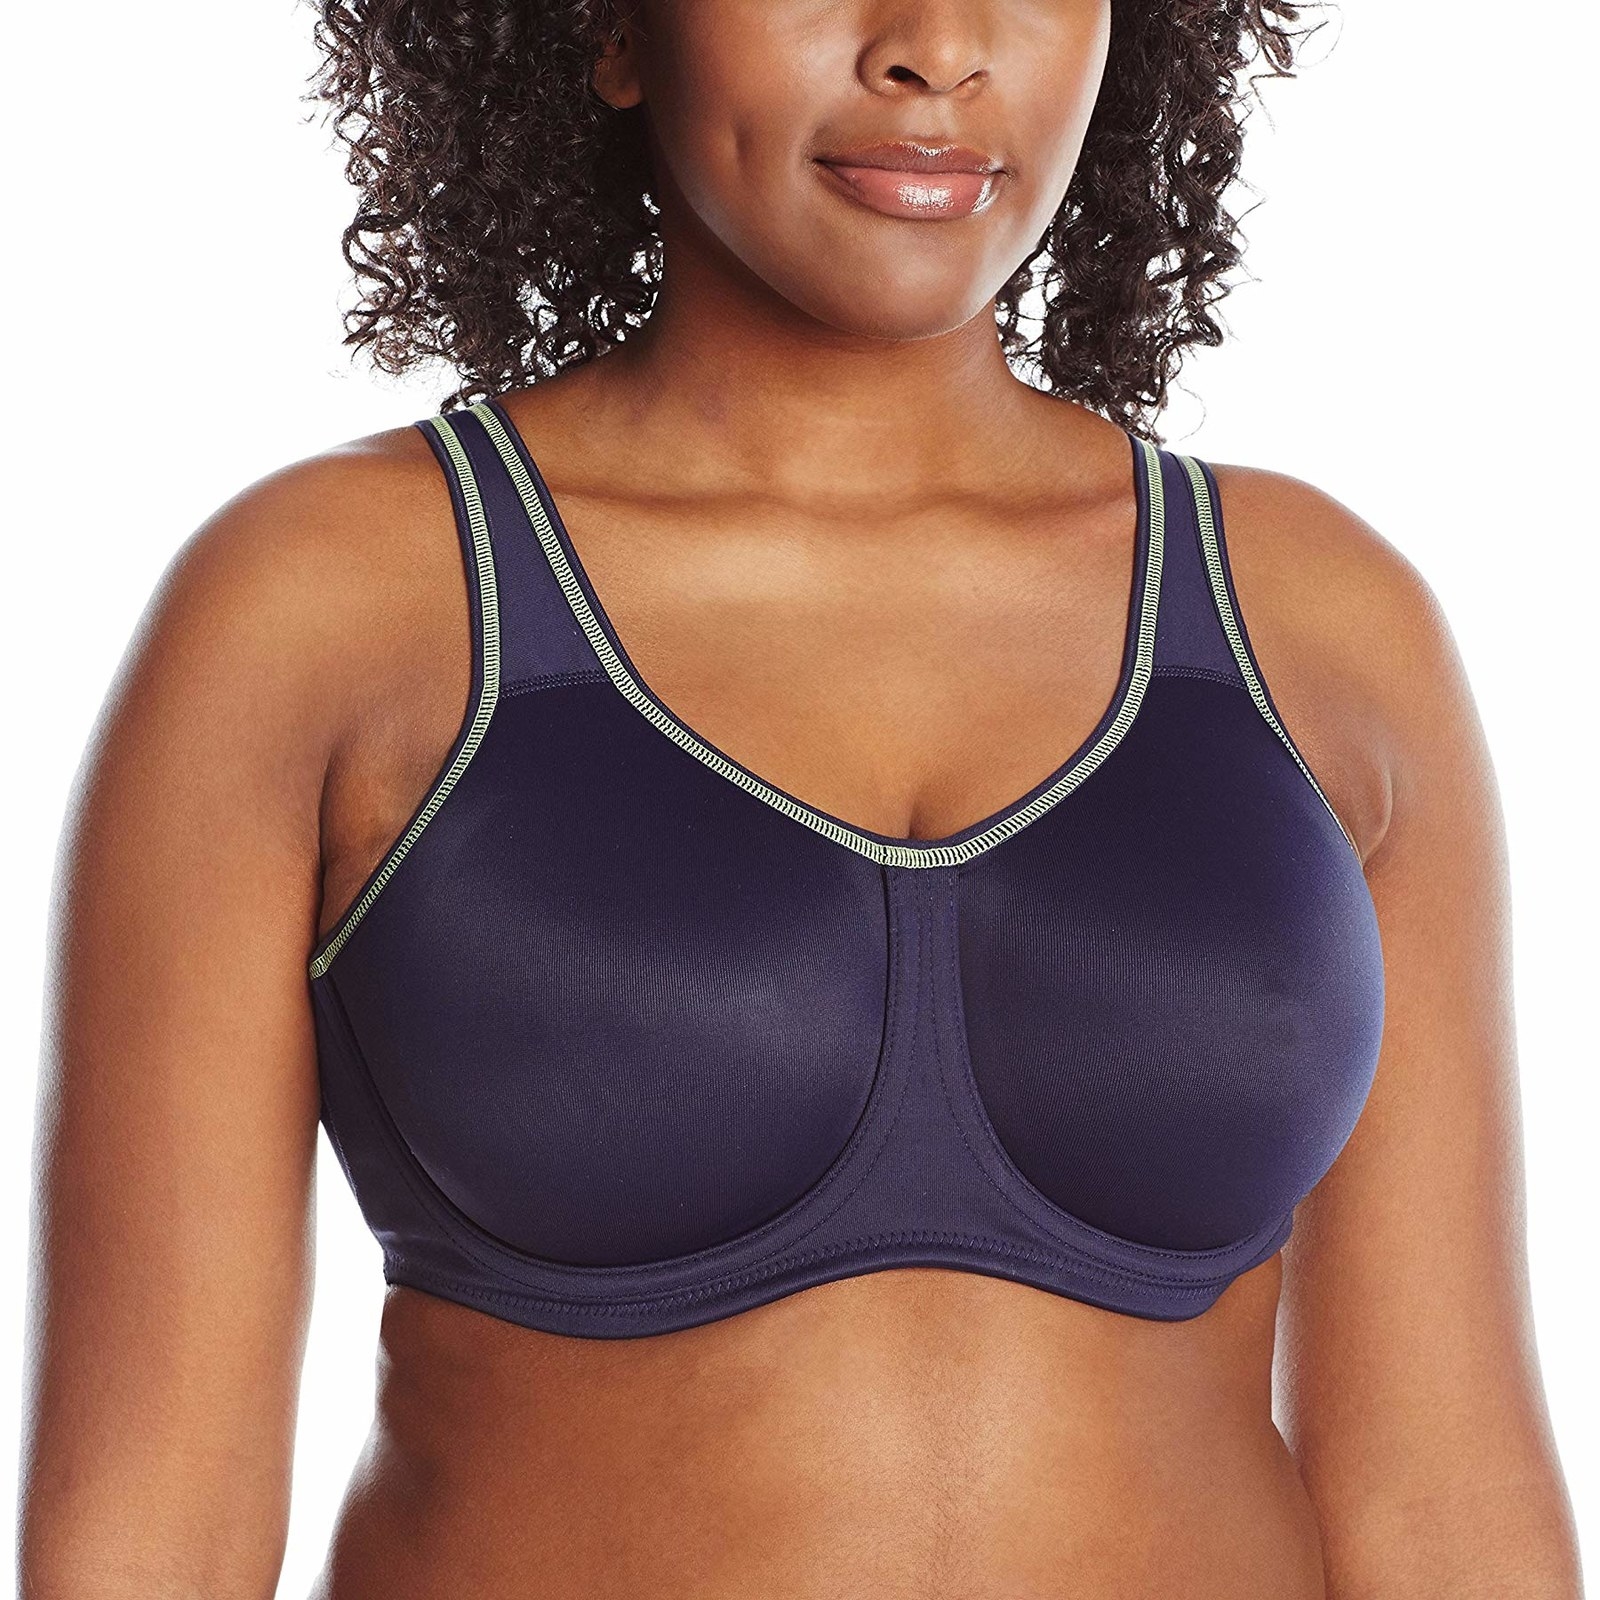 28 Dd Sports Bras That Can Actually Support Big Boobs